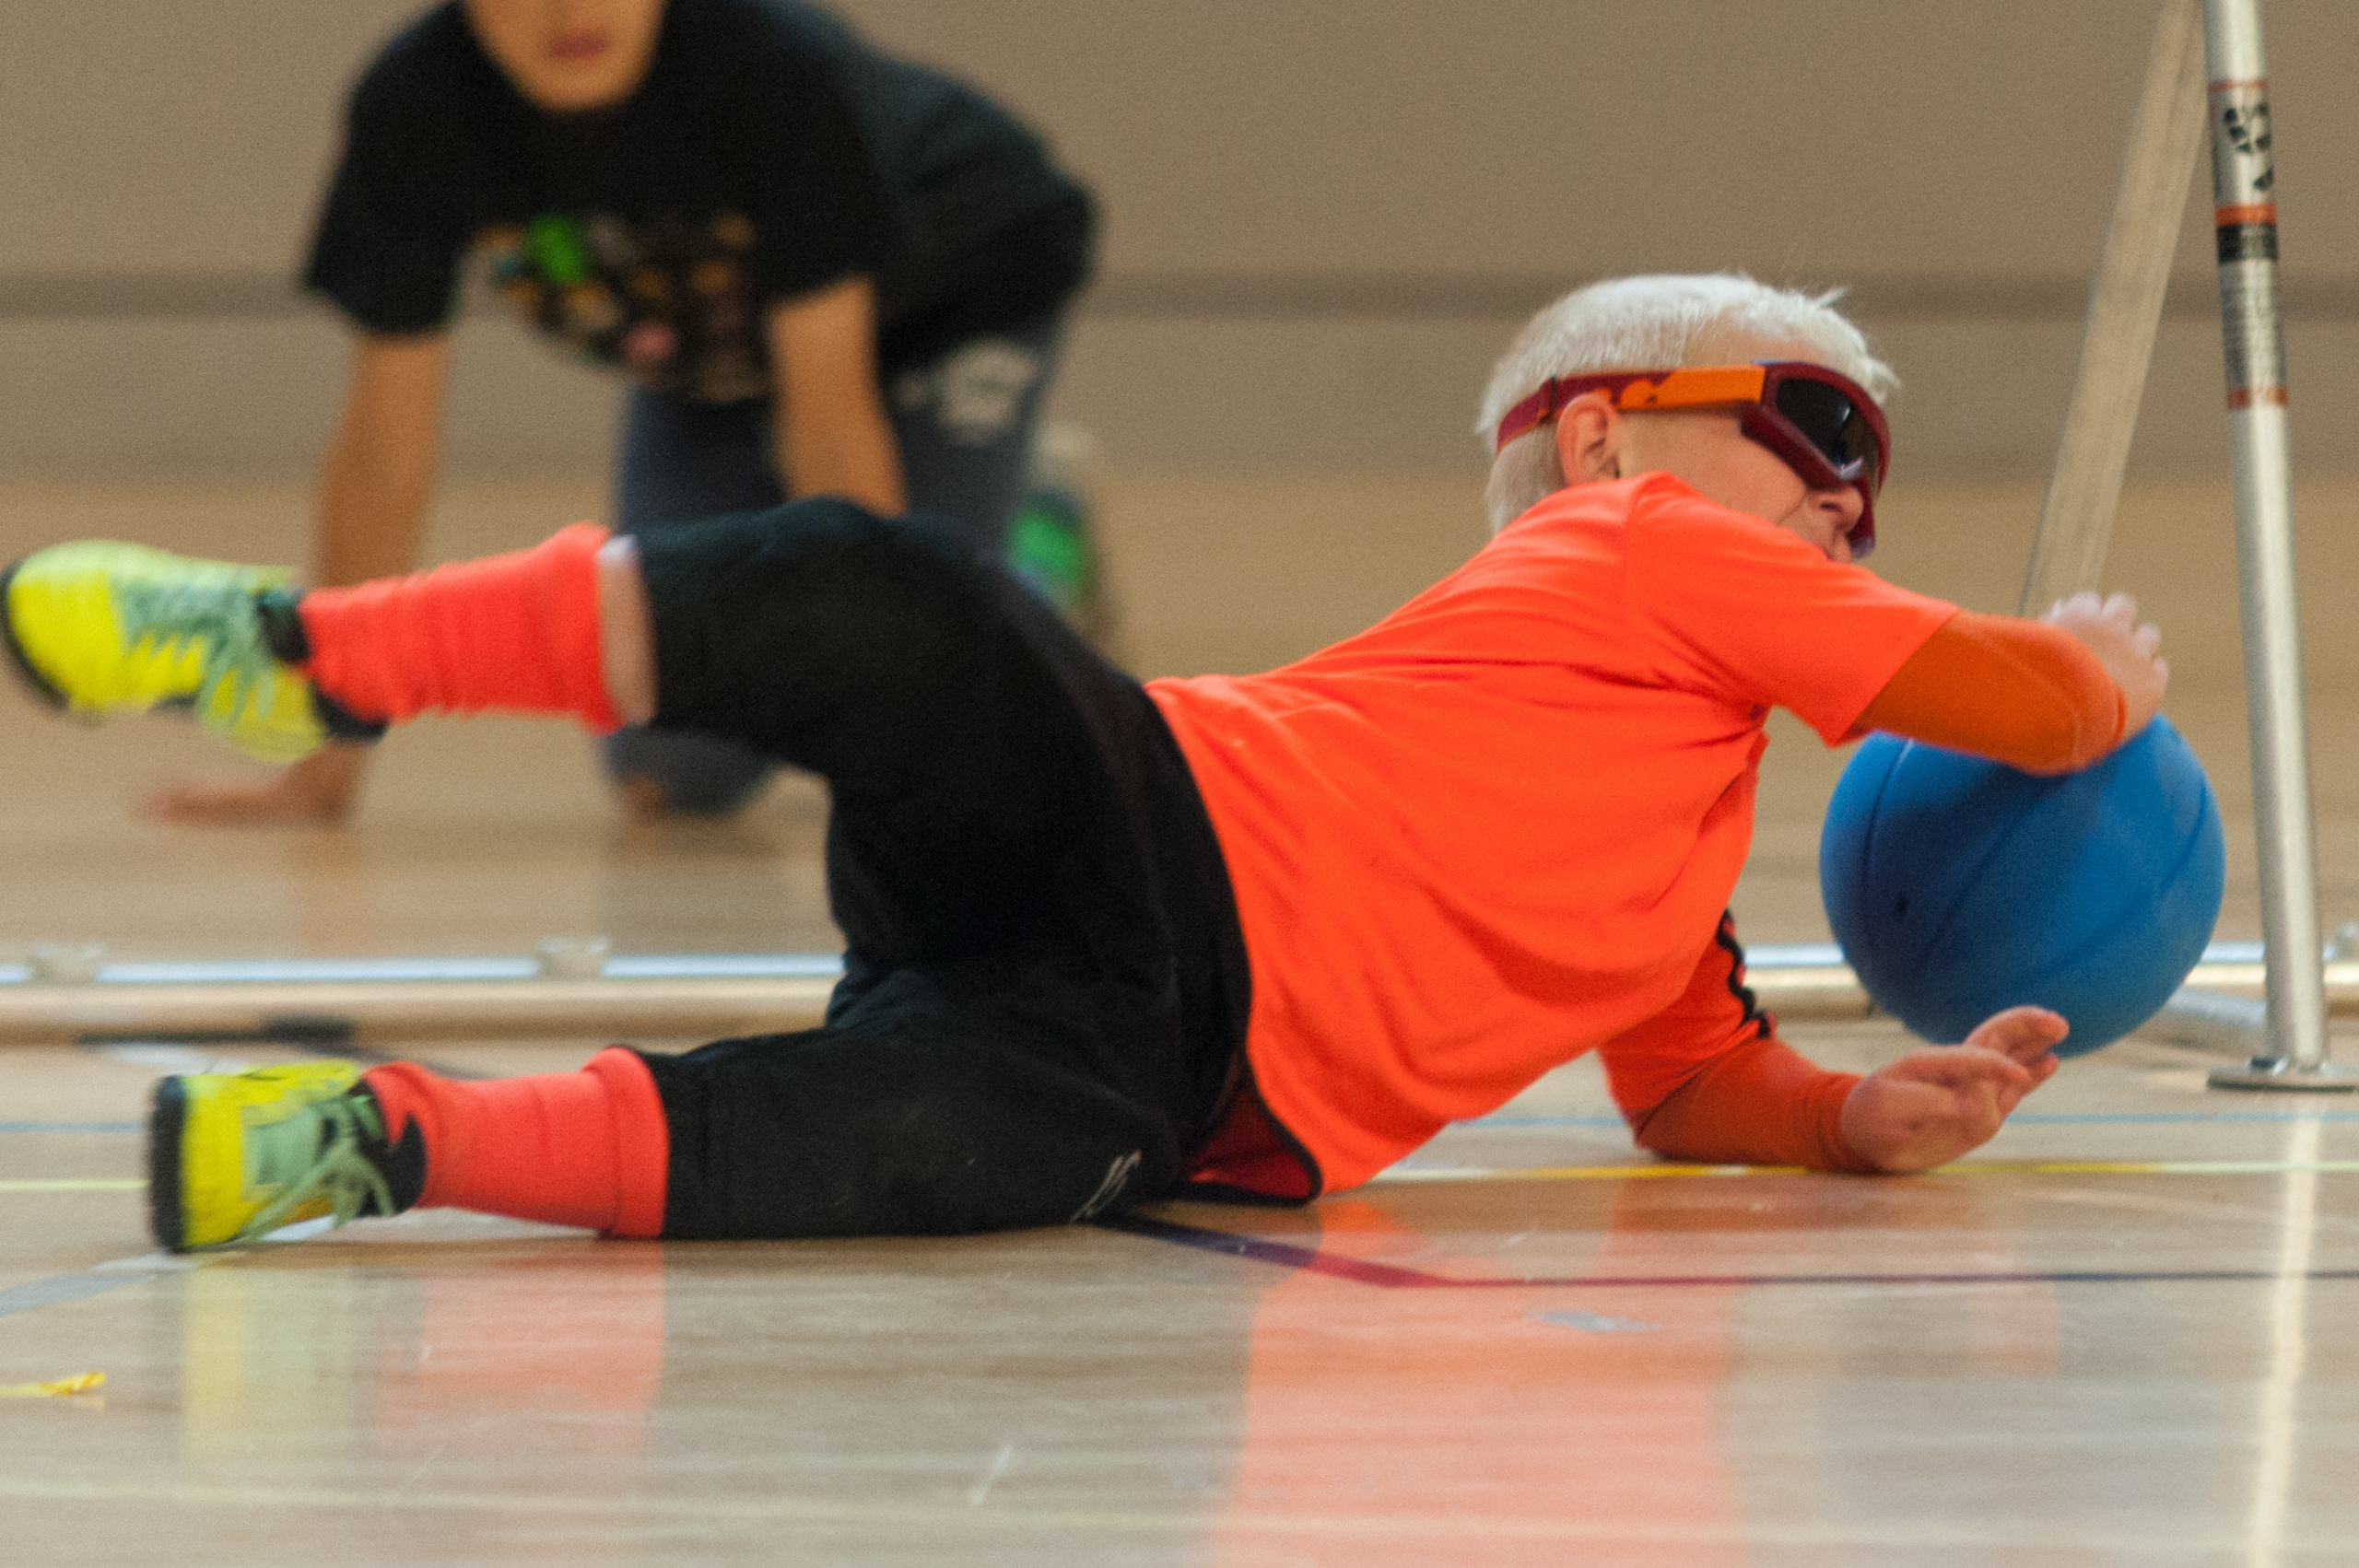 A child is on the floor of the court, stretched out to try and save a goal. He is wearing eye shades and a neon orange top and socks.